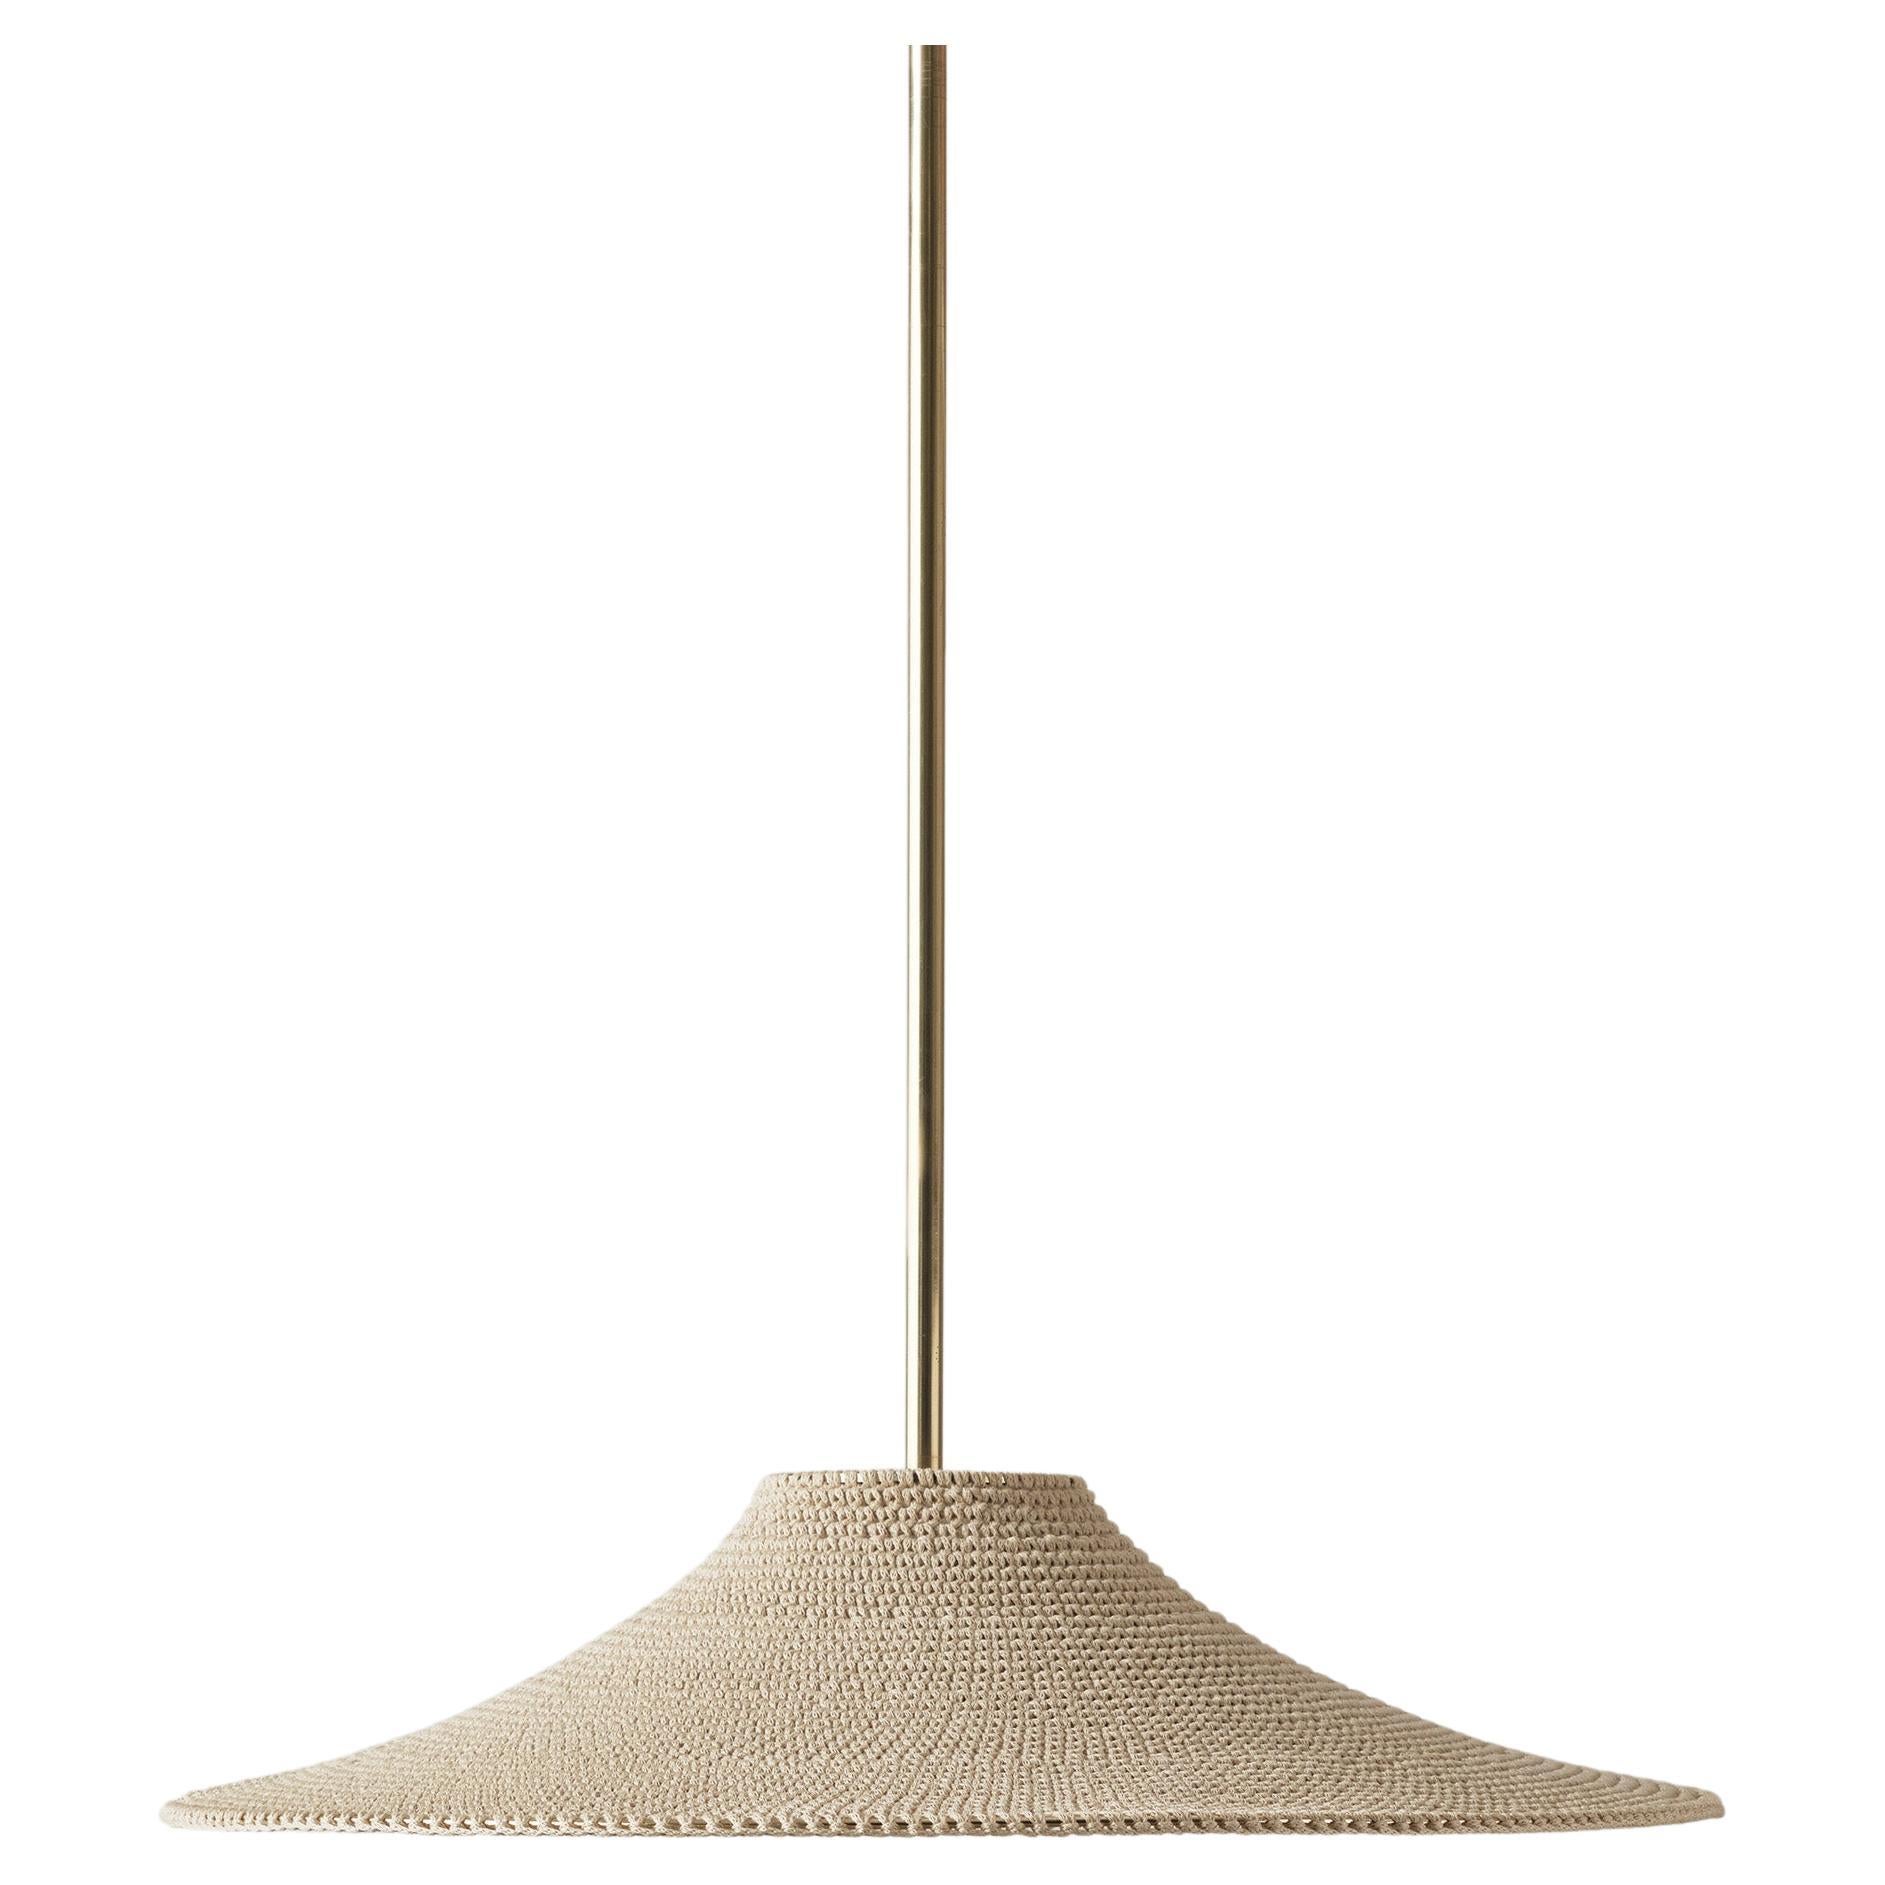 SS01 Pendant Light Ø80cm/31.5in, Hand Crocheted in 100% Egyptian Cotton For Sale